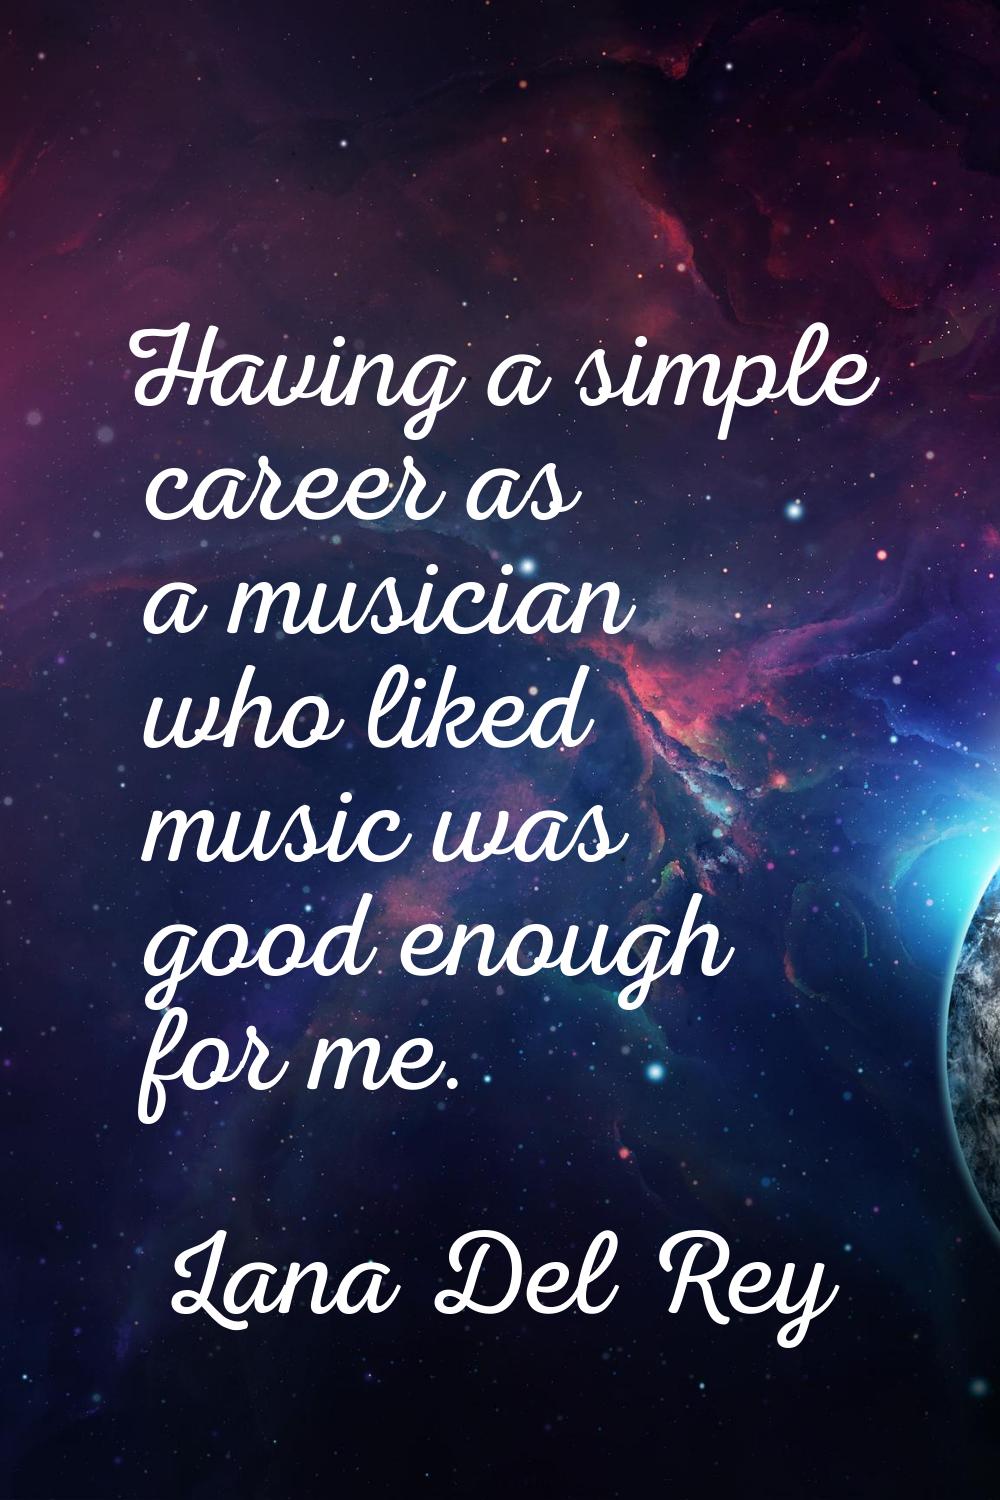 Having a simple career as a musician who liked music was good enough for me.